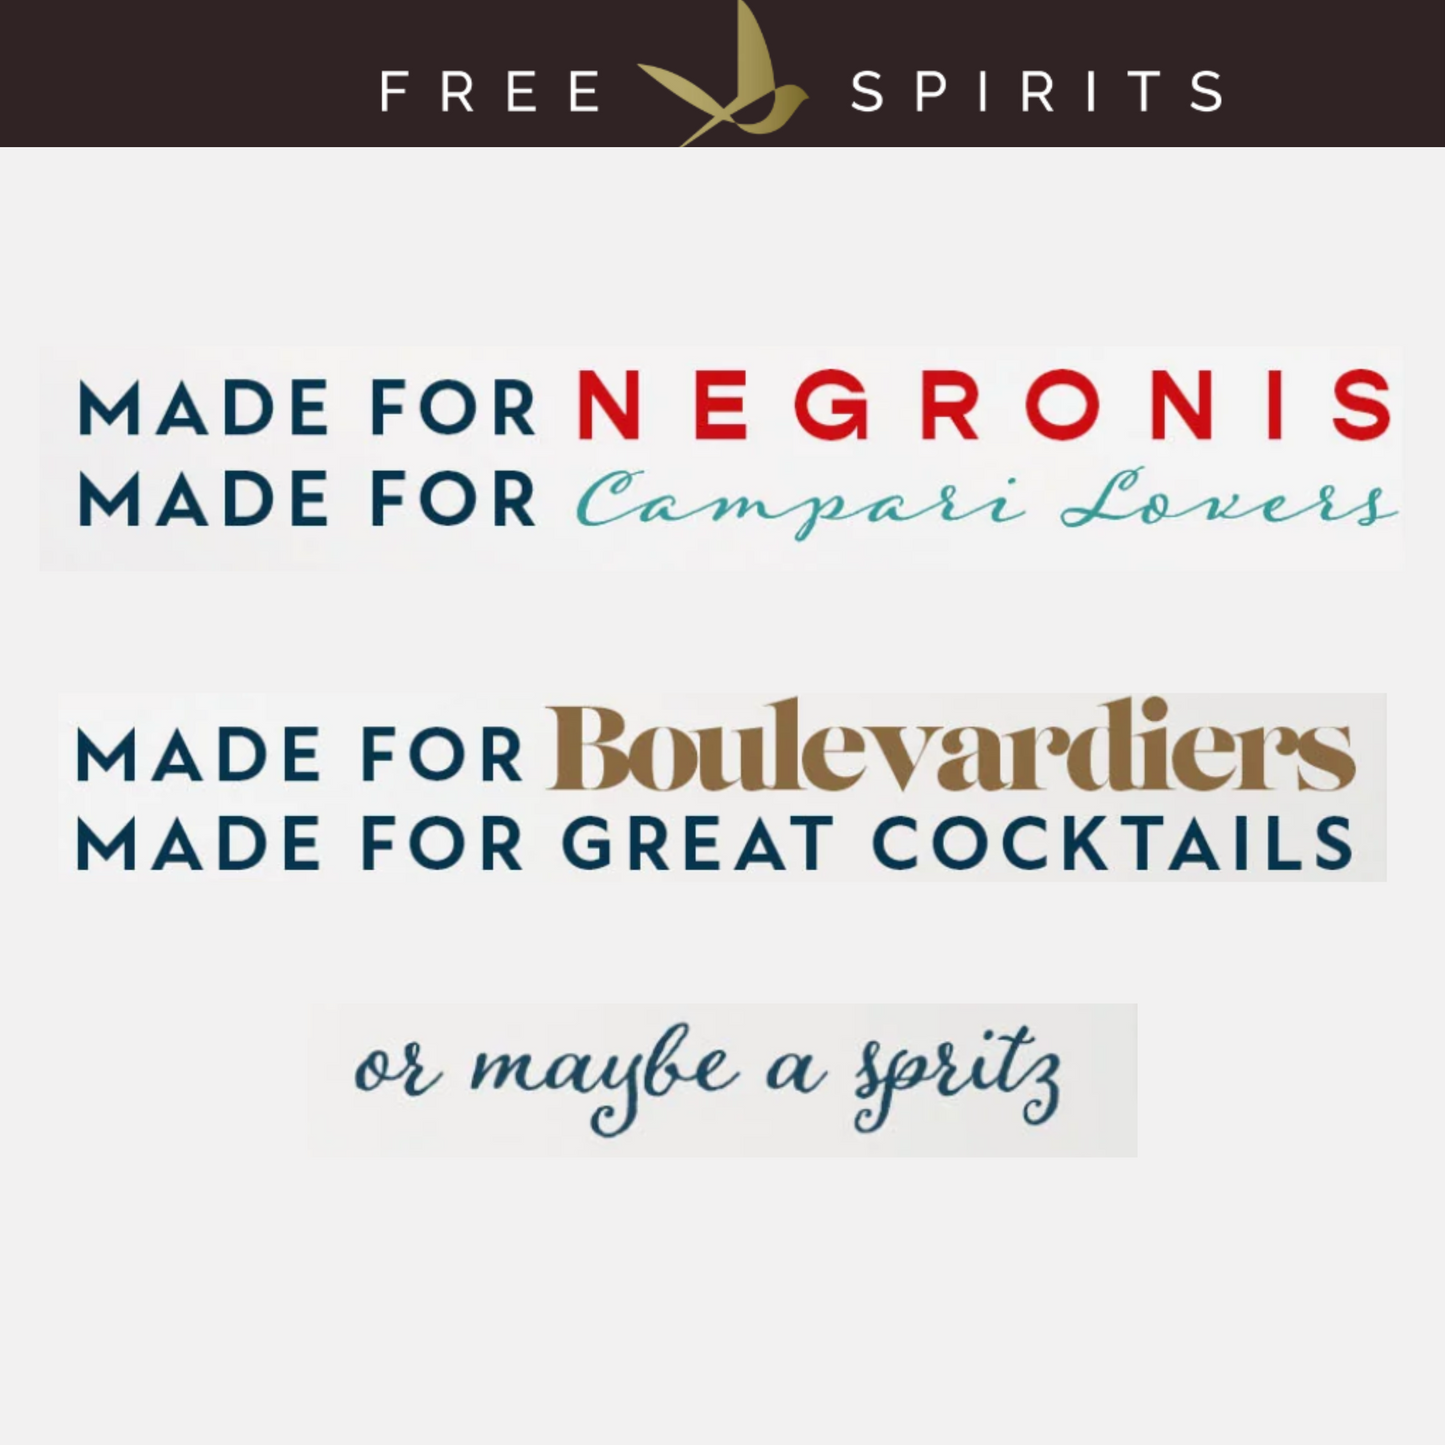 The Spirit of Milano by The Free Spirits Company